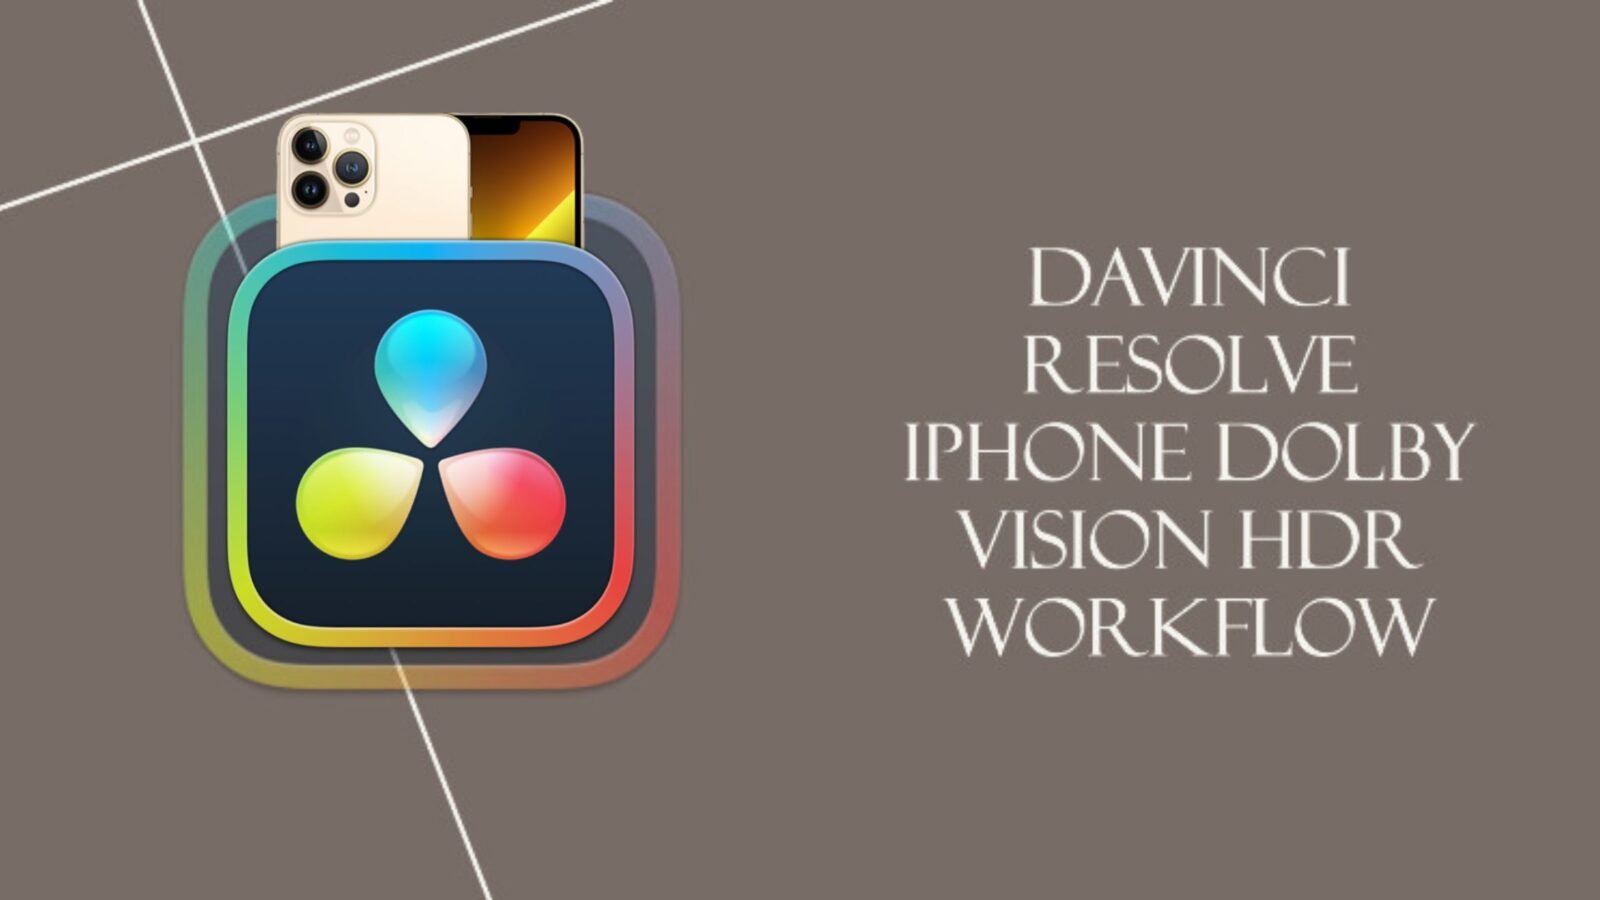 Davinci Resolve iPhone Dolby Vision HDR Workflow (Easy Method)